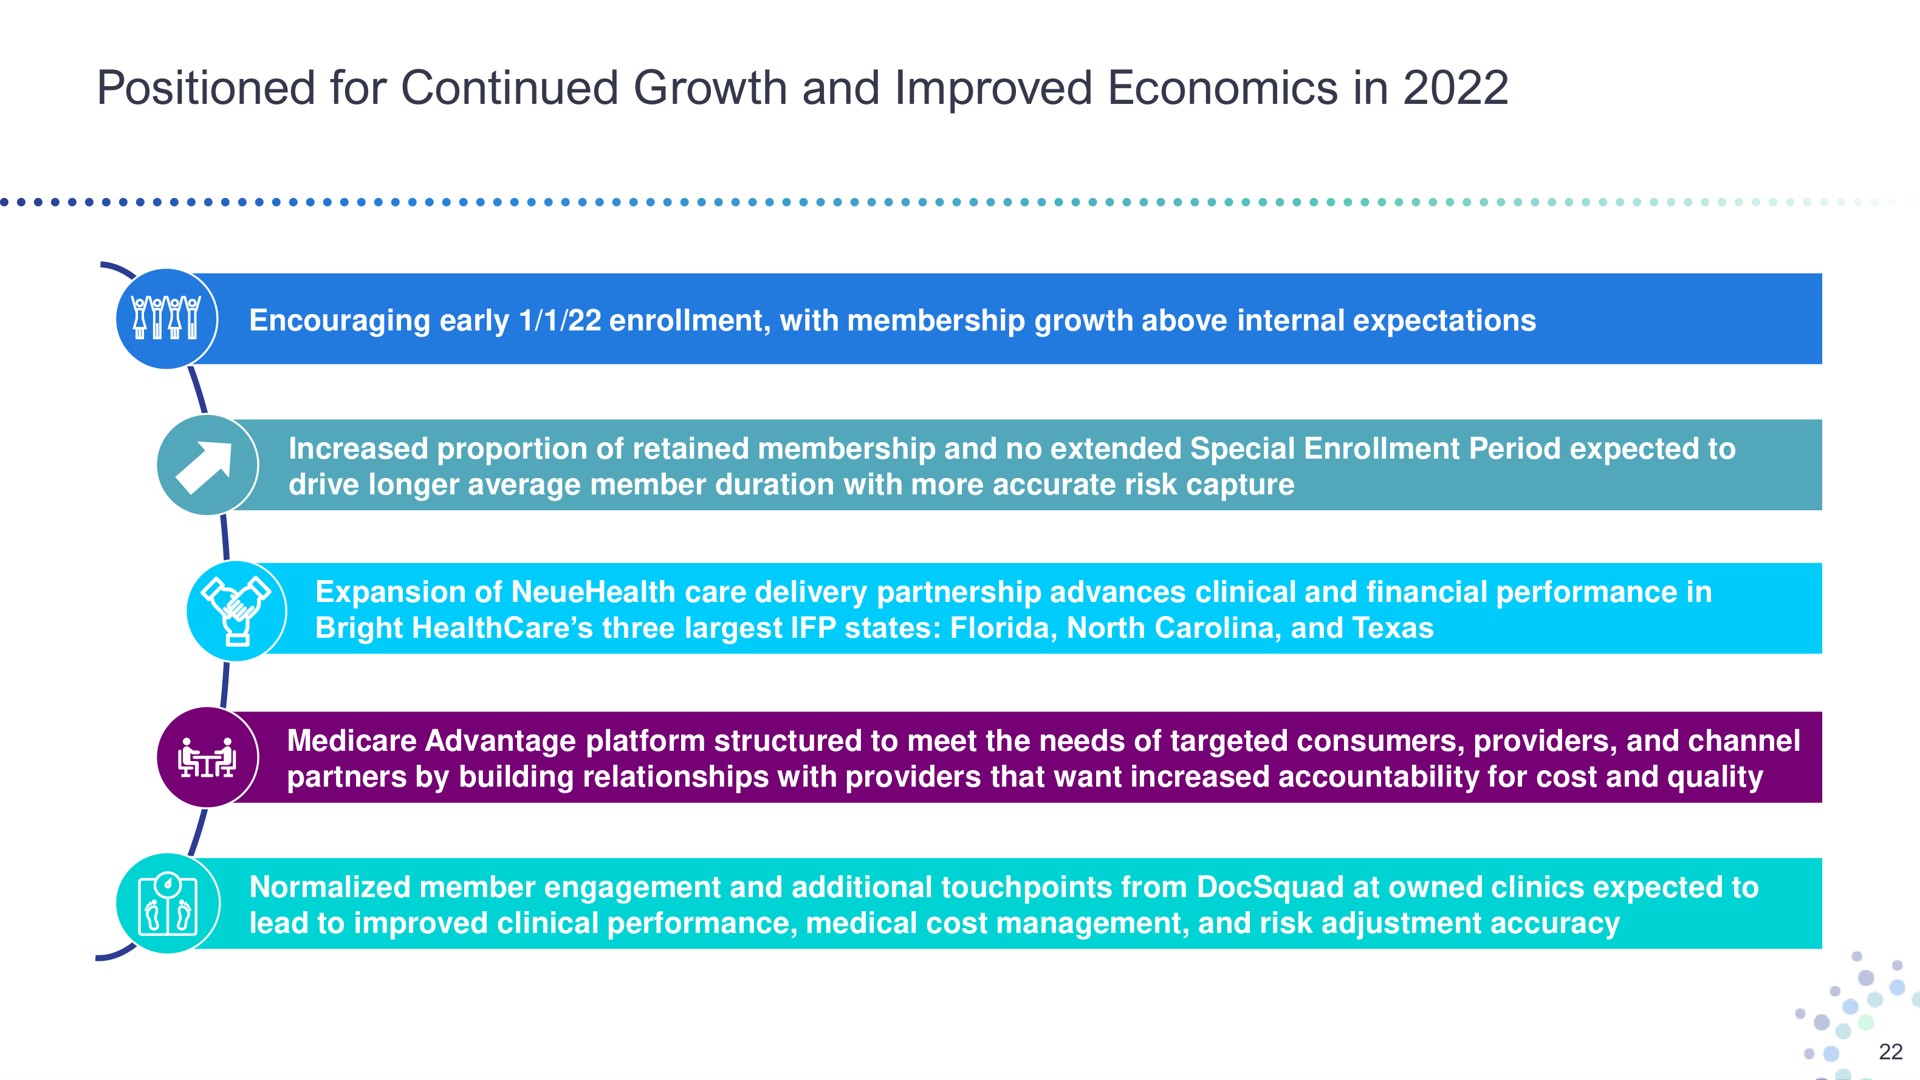 positioned for continued growth and improved economics in increased proportion of retained membership no extended special enrollment period expected to drive longer average member duration with more accurate risk capture expansion of care delivery partnership advances clinical financial performance bright three states north advantage platform structured to meet the needs of targeted consumers providers channel partners by building relationships with providers that want increased accountability cost quality lead to clinical performance medical cost management risk adjustment accuracy normalized member engagement additional from at owned clinics expected to | Bright Health Group